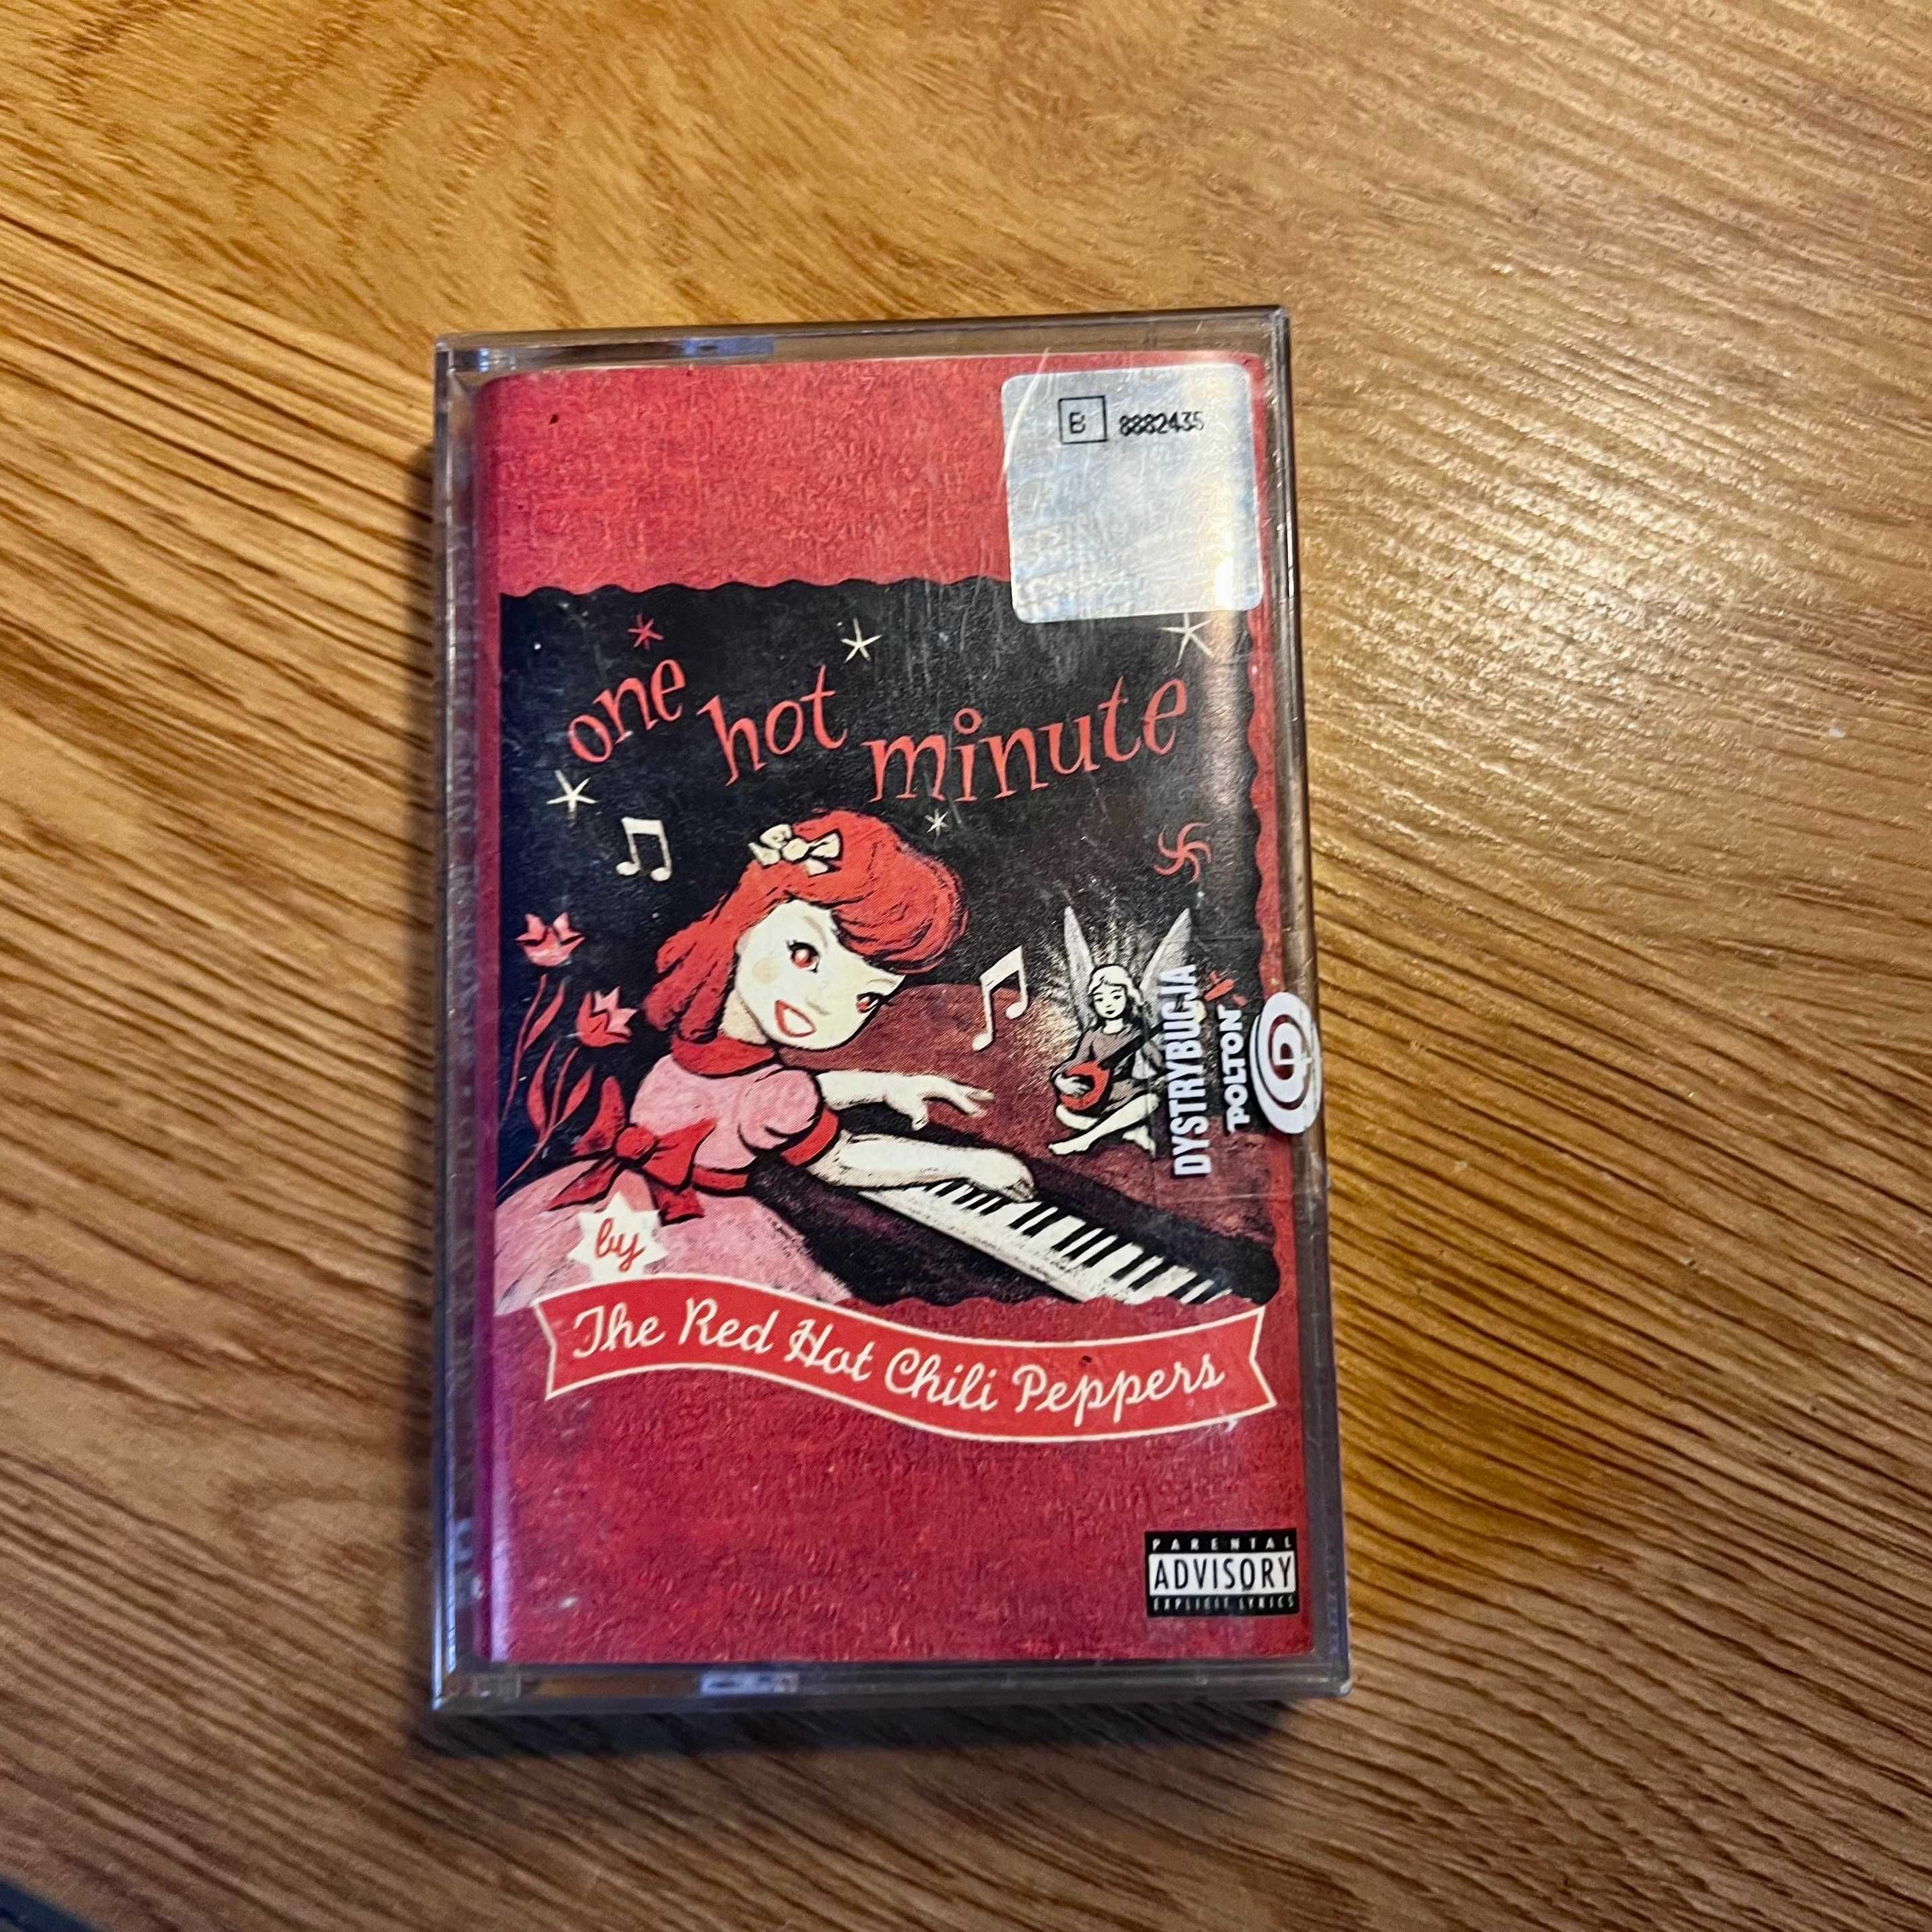 Red Hot Chili Peppers "One hot minute" kaseta oryginał